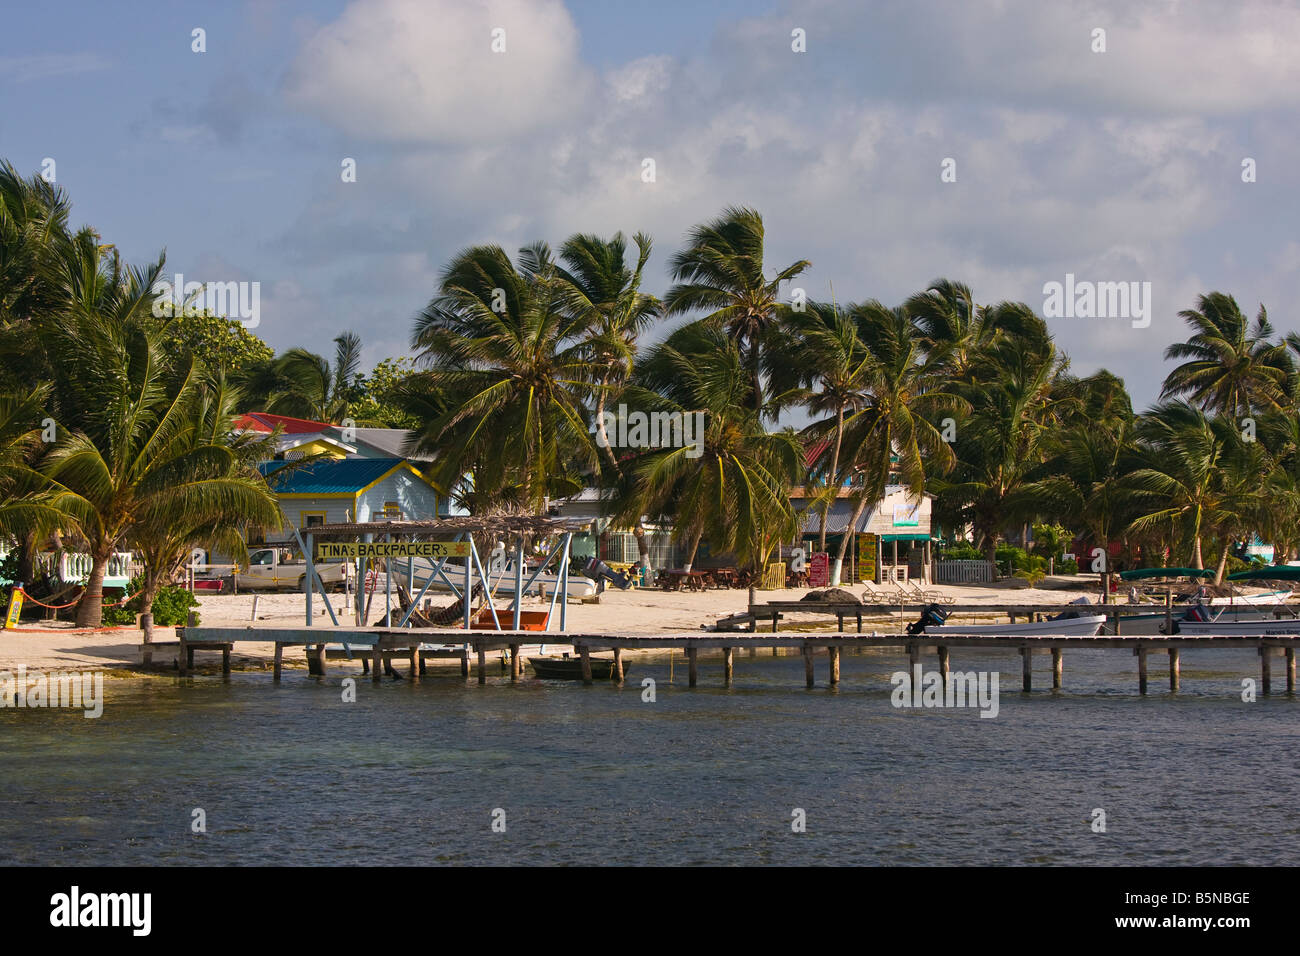 CAYE CAULKER BELIZE Docks and palm trees on waterfront Stock Photo